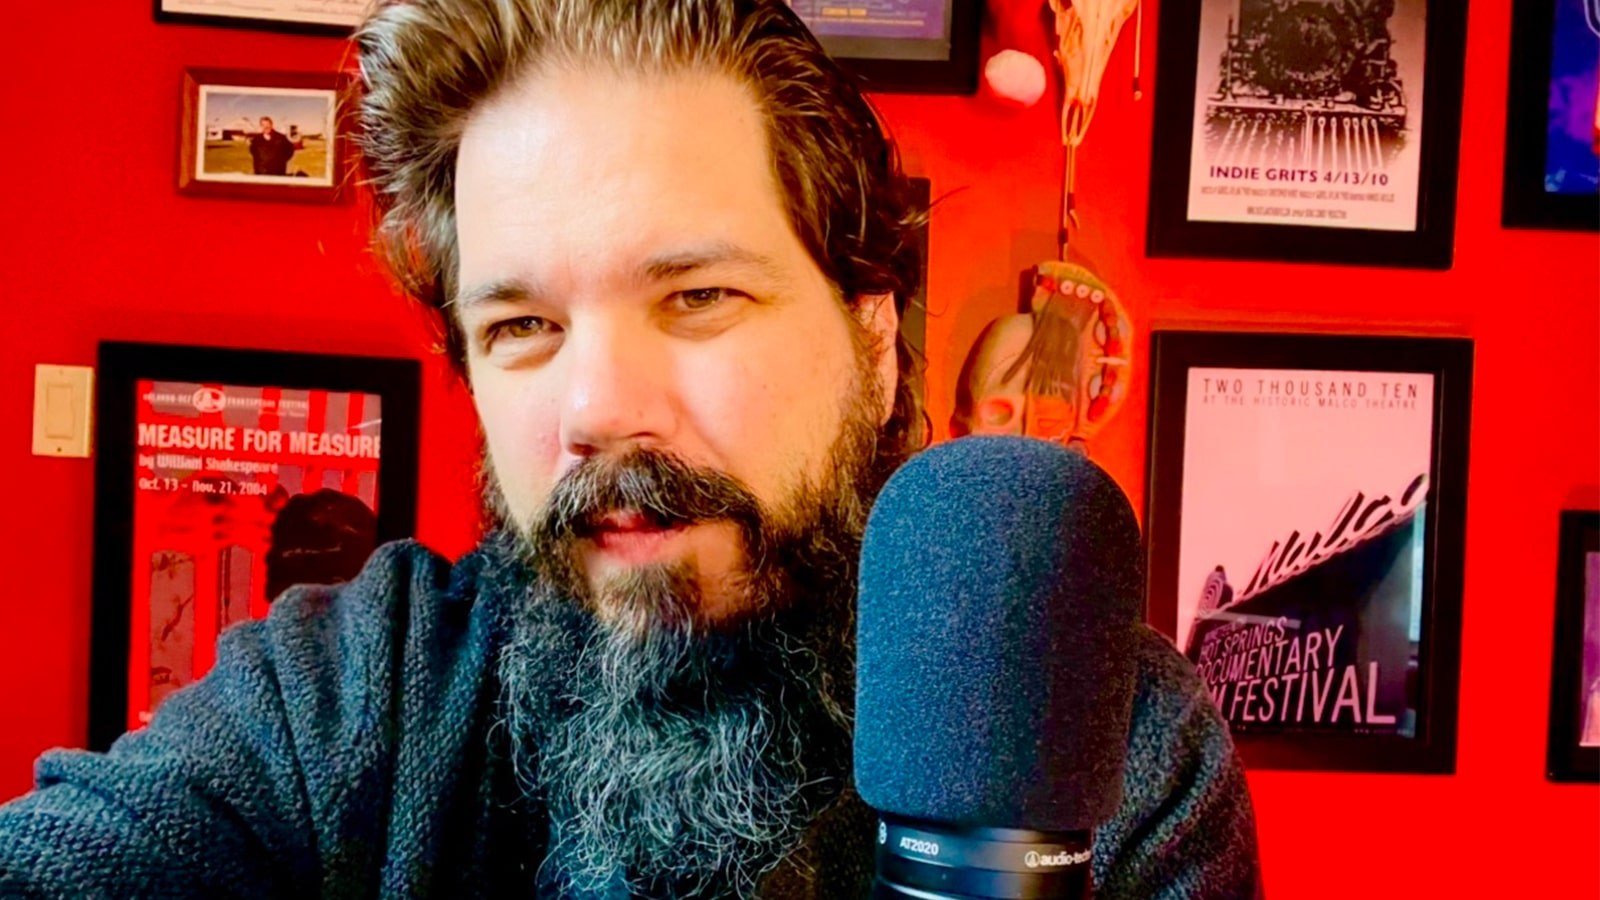 Christopher Ramsey, a man with a long black and grey beard and short hair sitting with a microphone in front of a red wall filled with framed film posters.